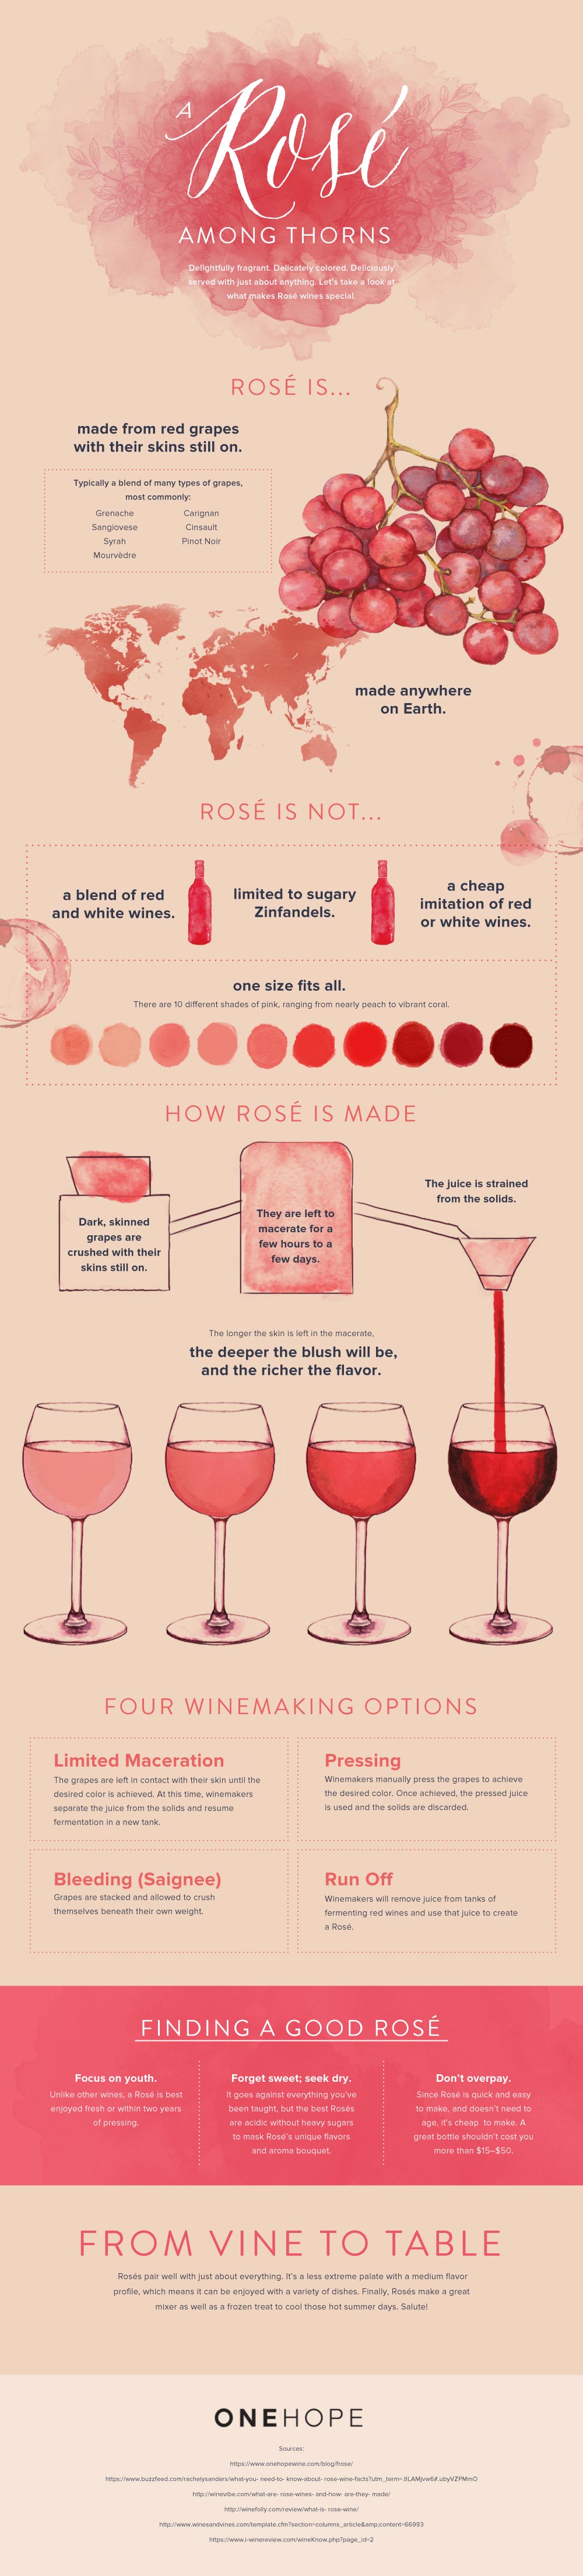 Rosé 101: Everything You Need To Know About This Delicious Wine